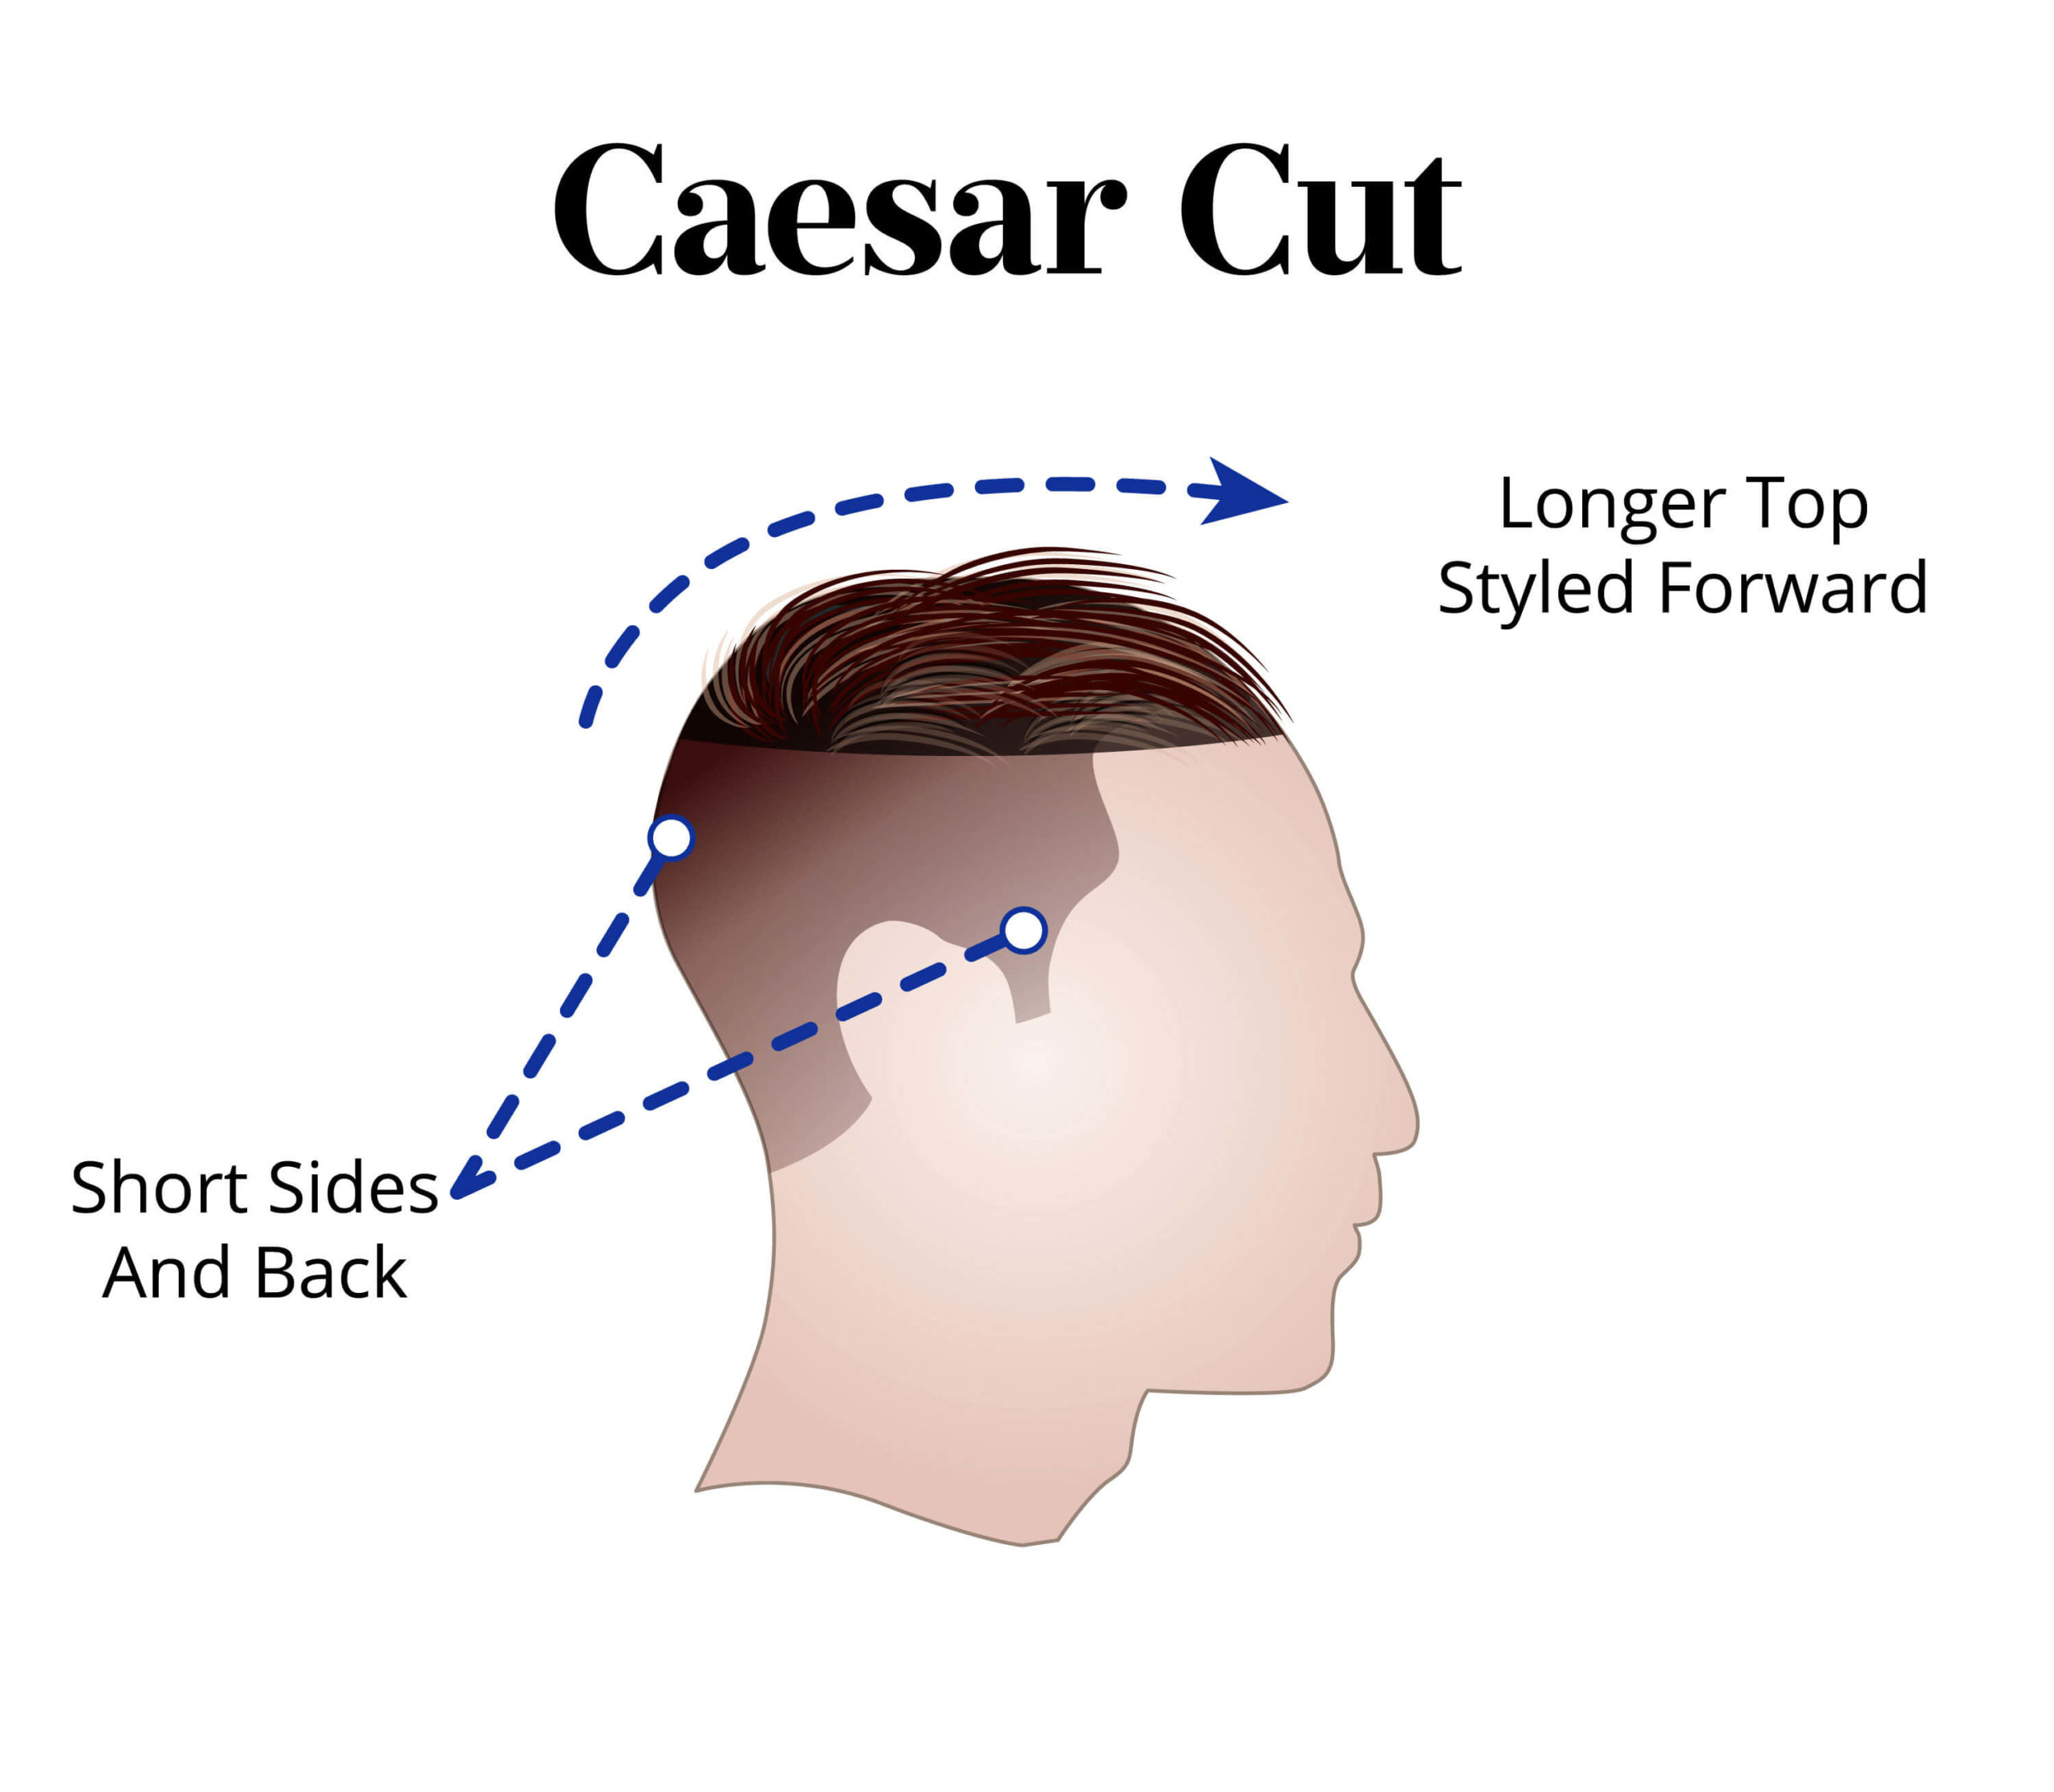 caesar cut is the perfect men's hairstyle for a man in their 40s